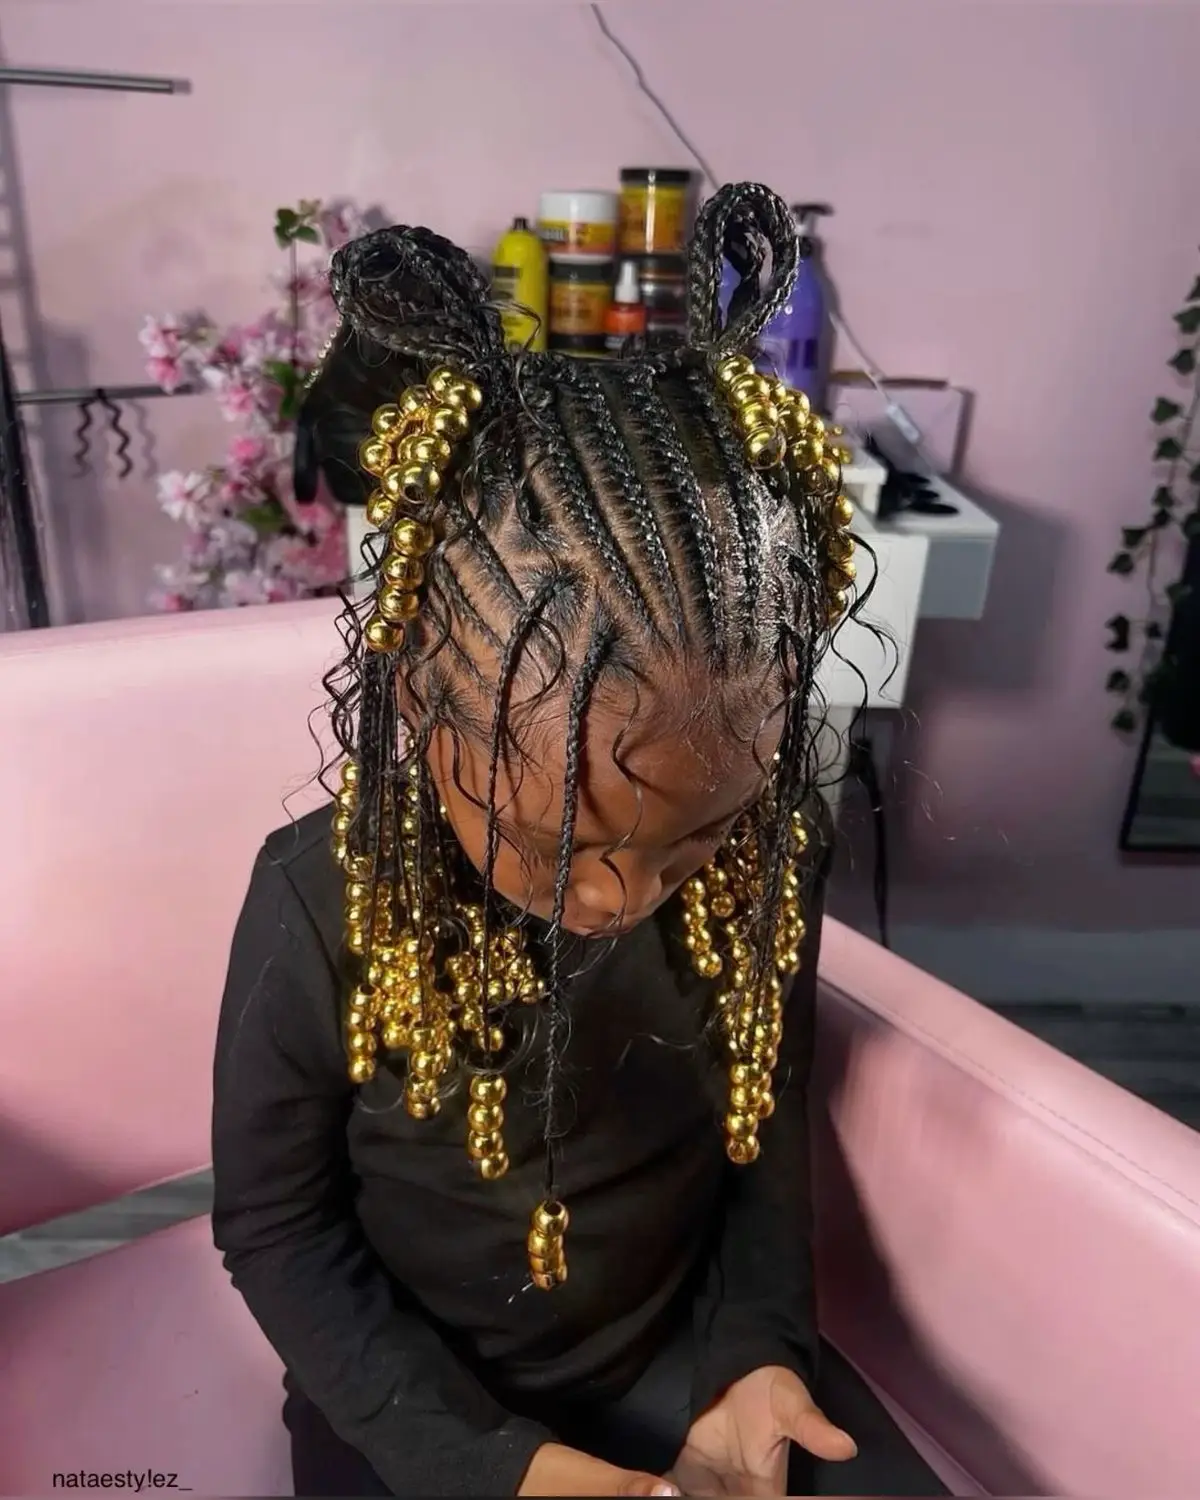 Kinky Hair Styles - Who can name these #braids? #Kids can have cute  #HairStyles too!